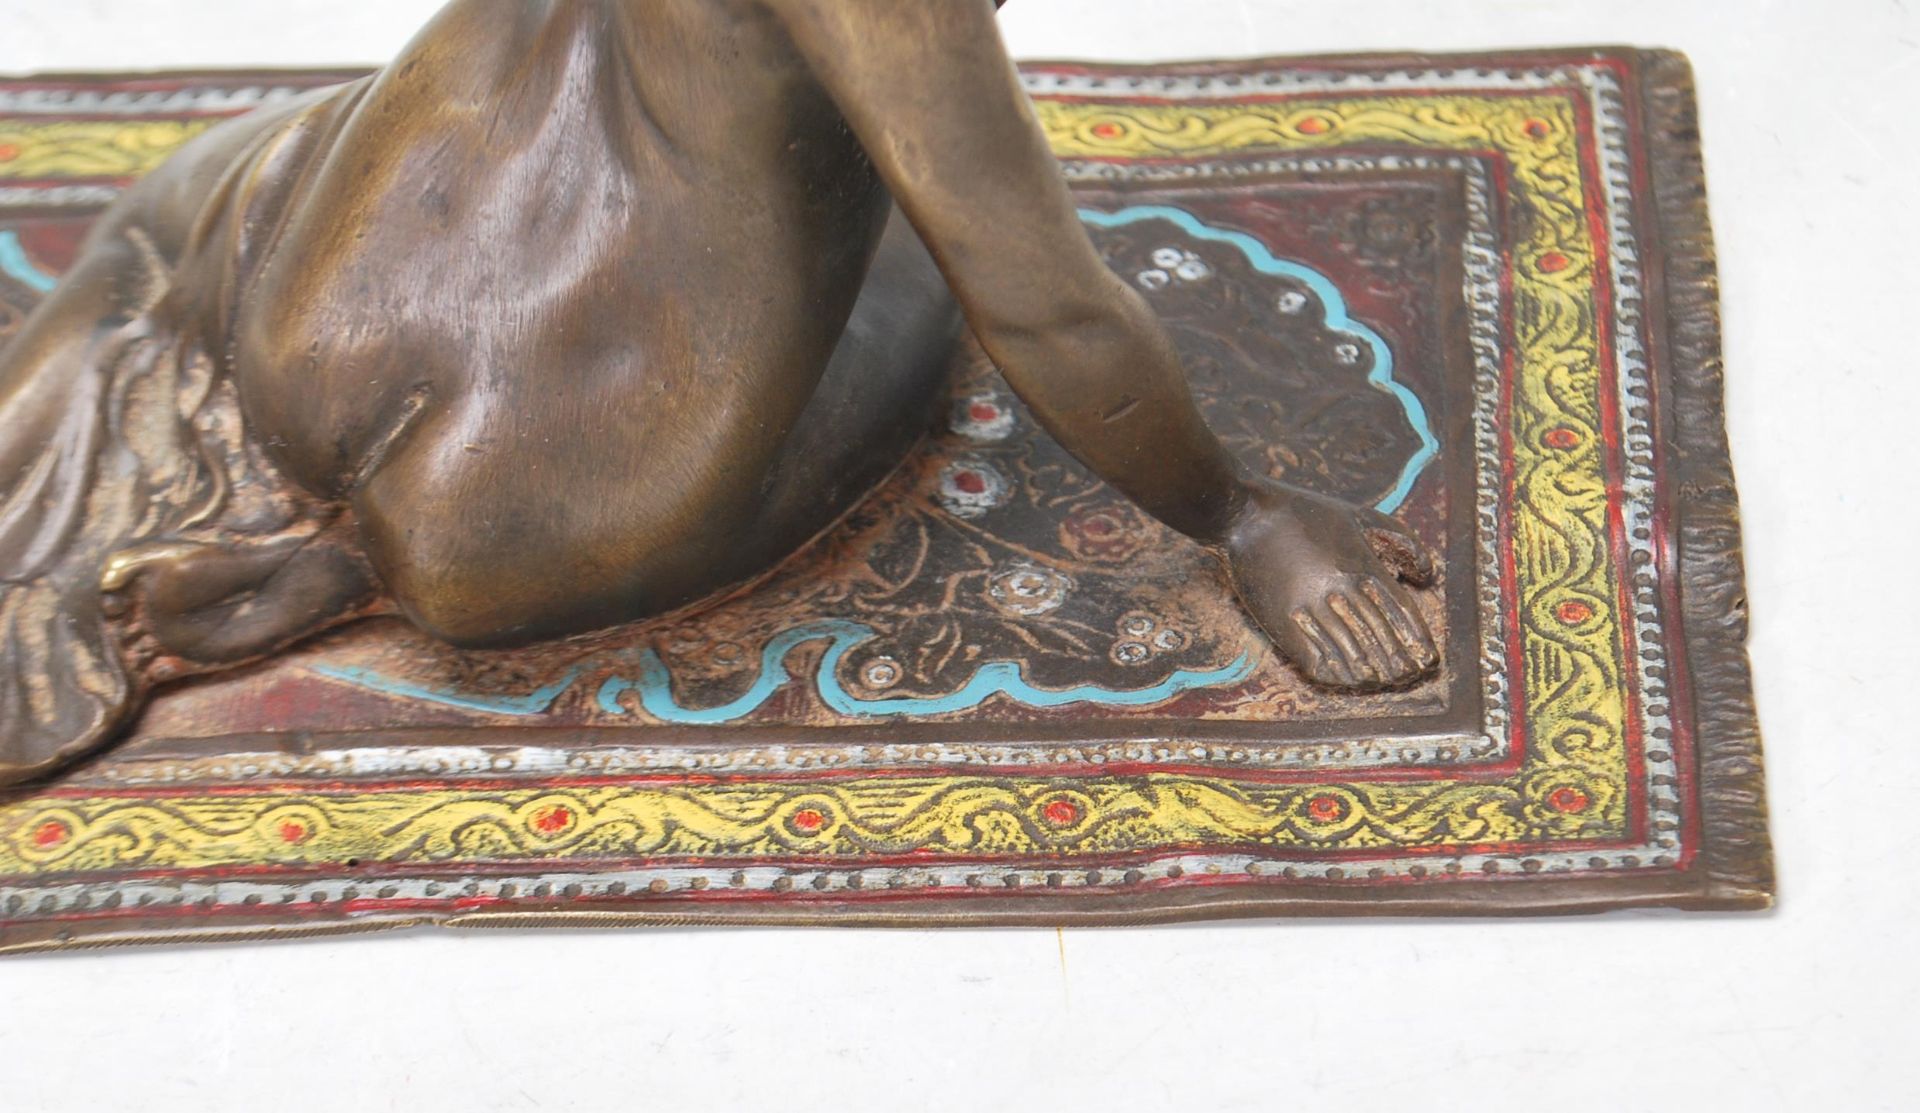 20TH CENTURY VIENNA BRONZE FIGURINE OF A LADY ON A RUG - Image 6 of 8